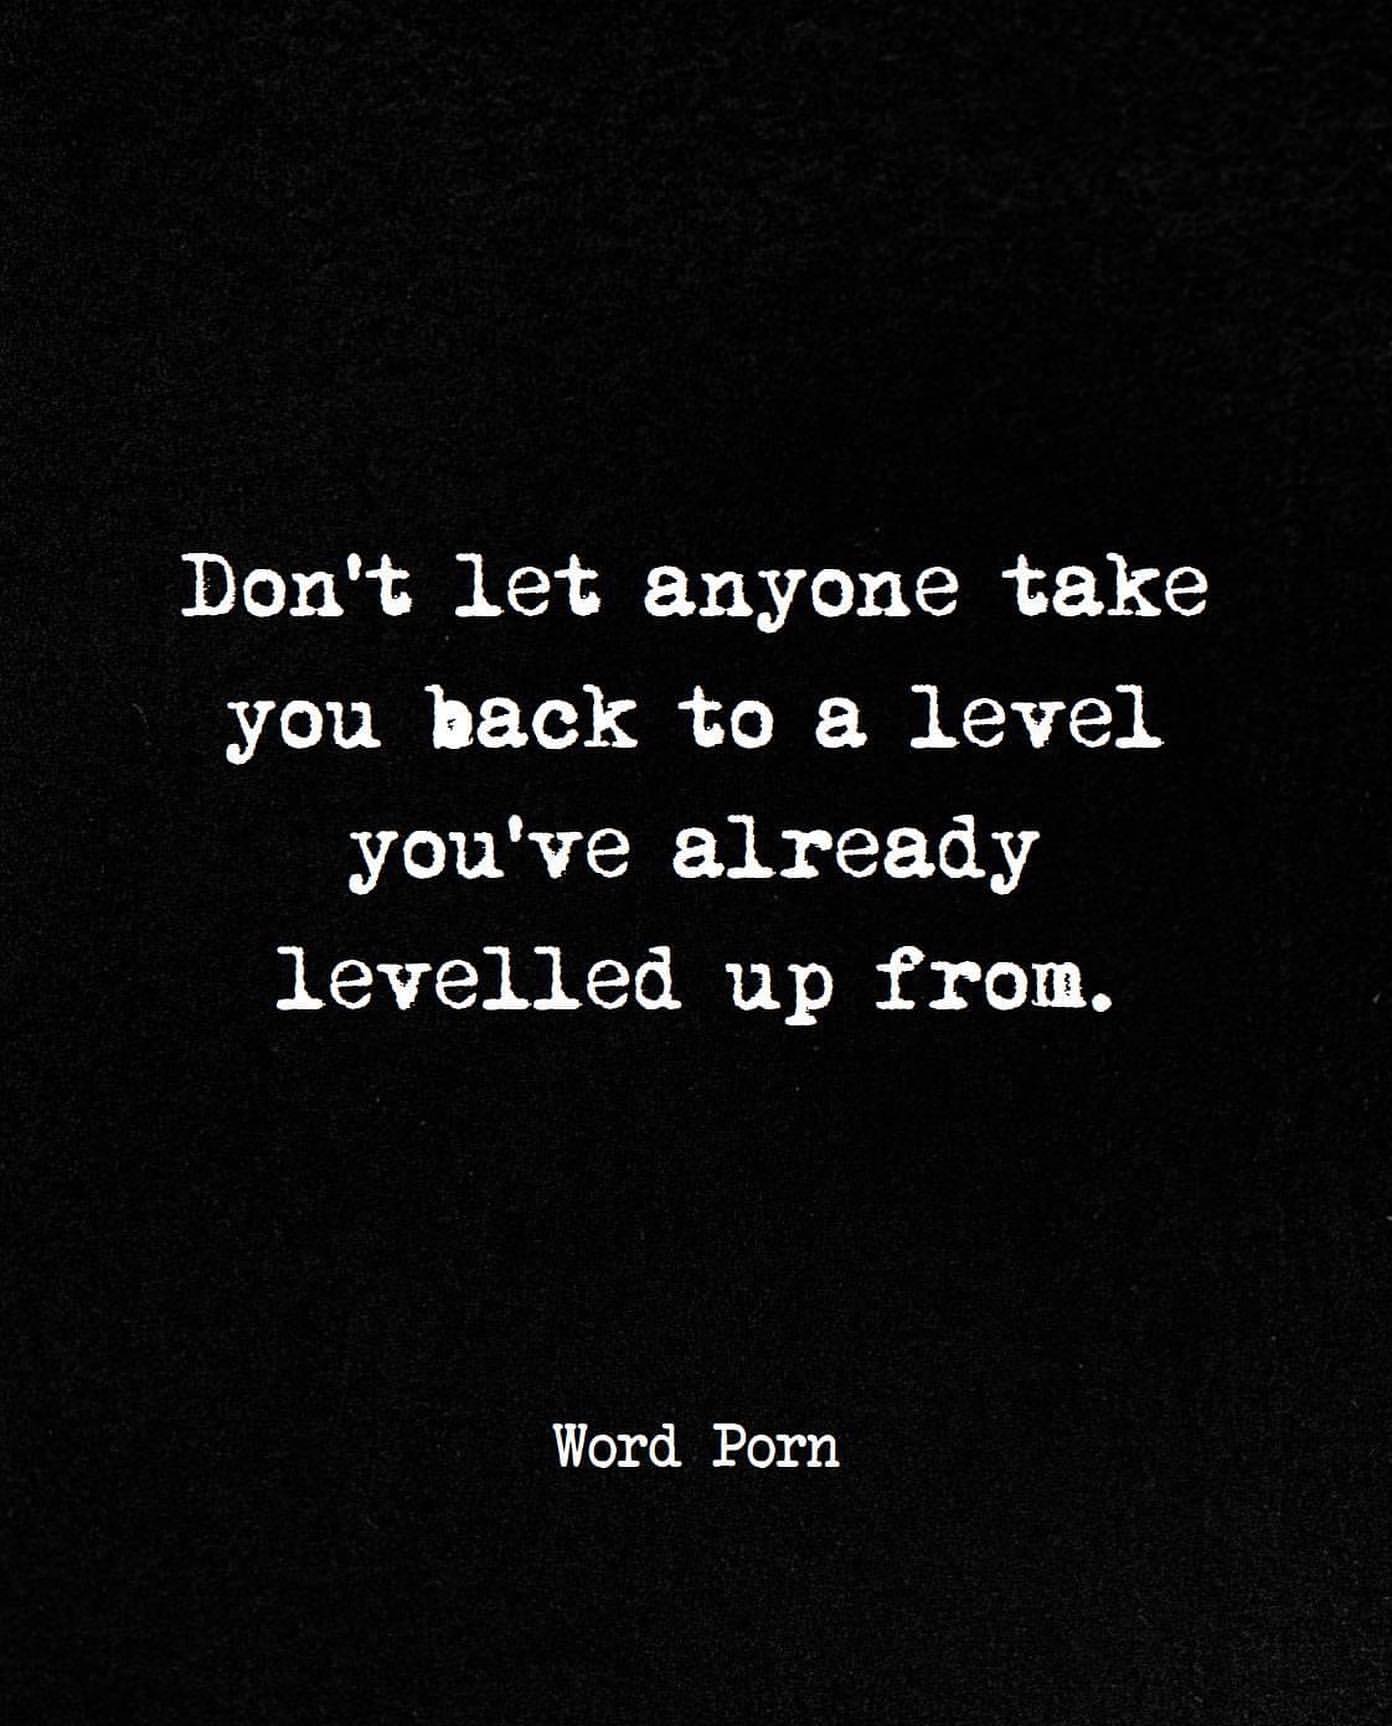 Don't let anyone take you back to a level you've already levelled up from.